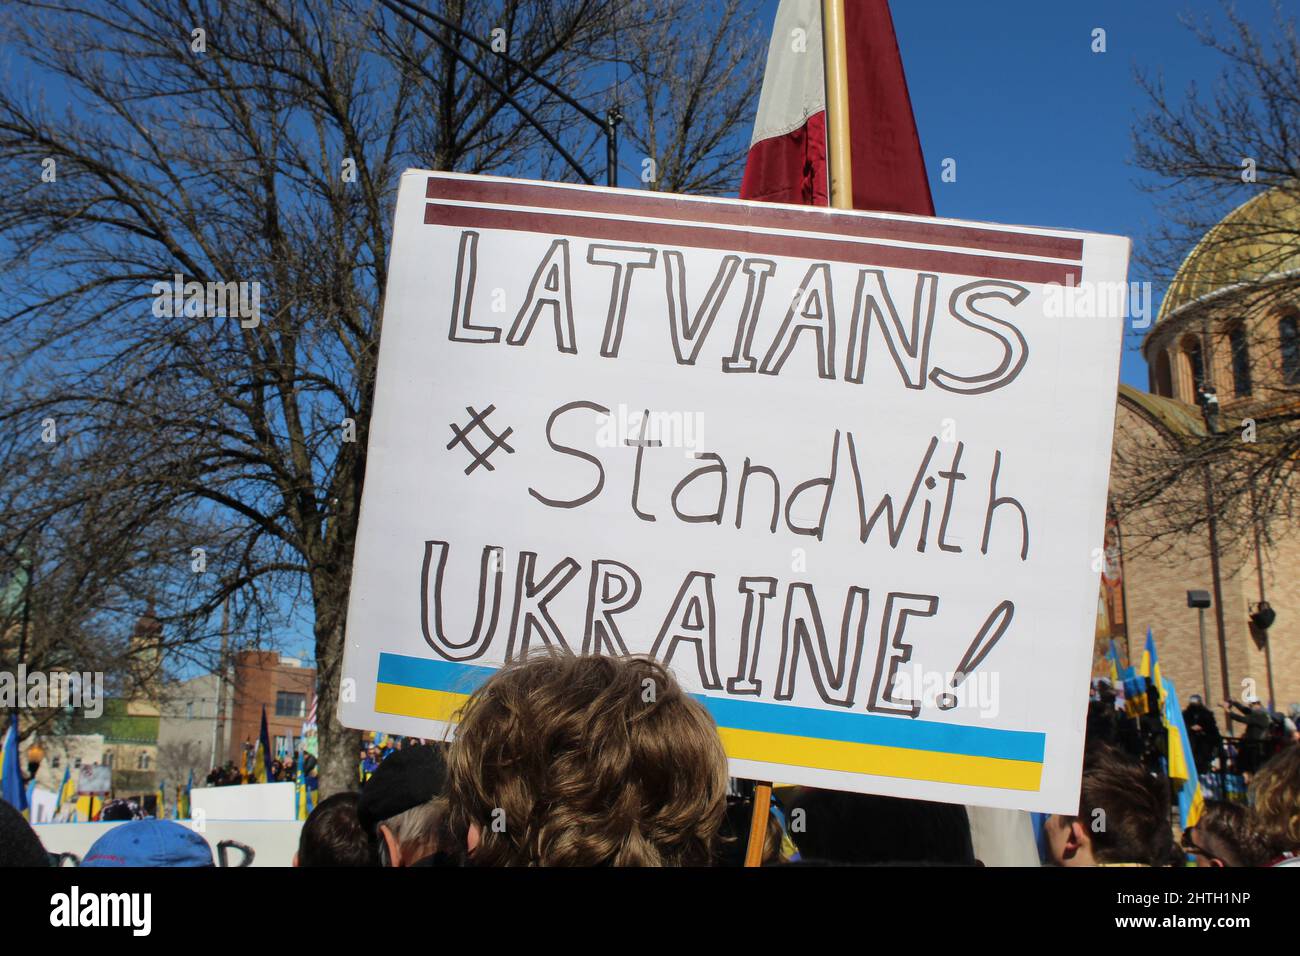 Latvians stand with Ukraine protest sign at Ukrainian Village protest in Chicago Stock Photo